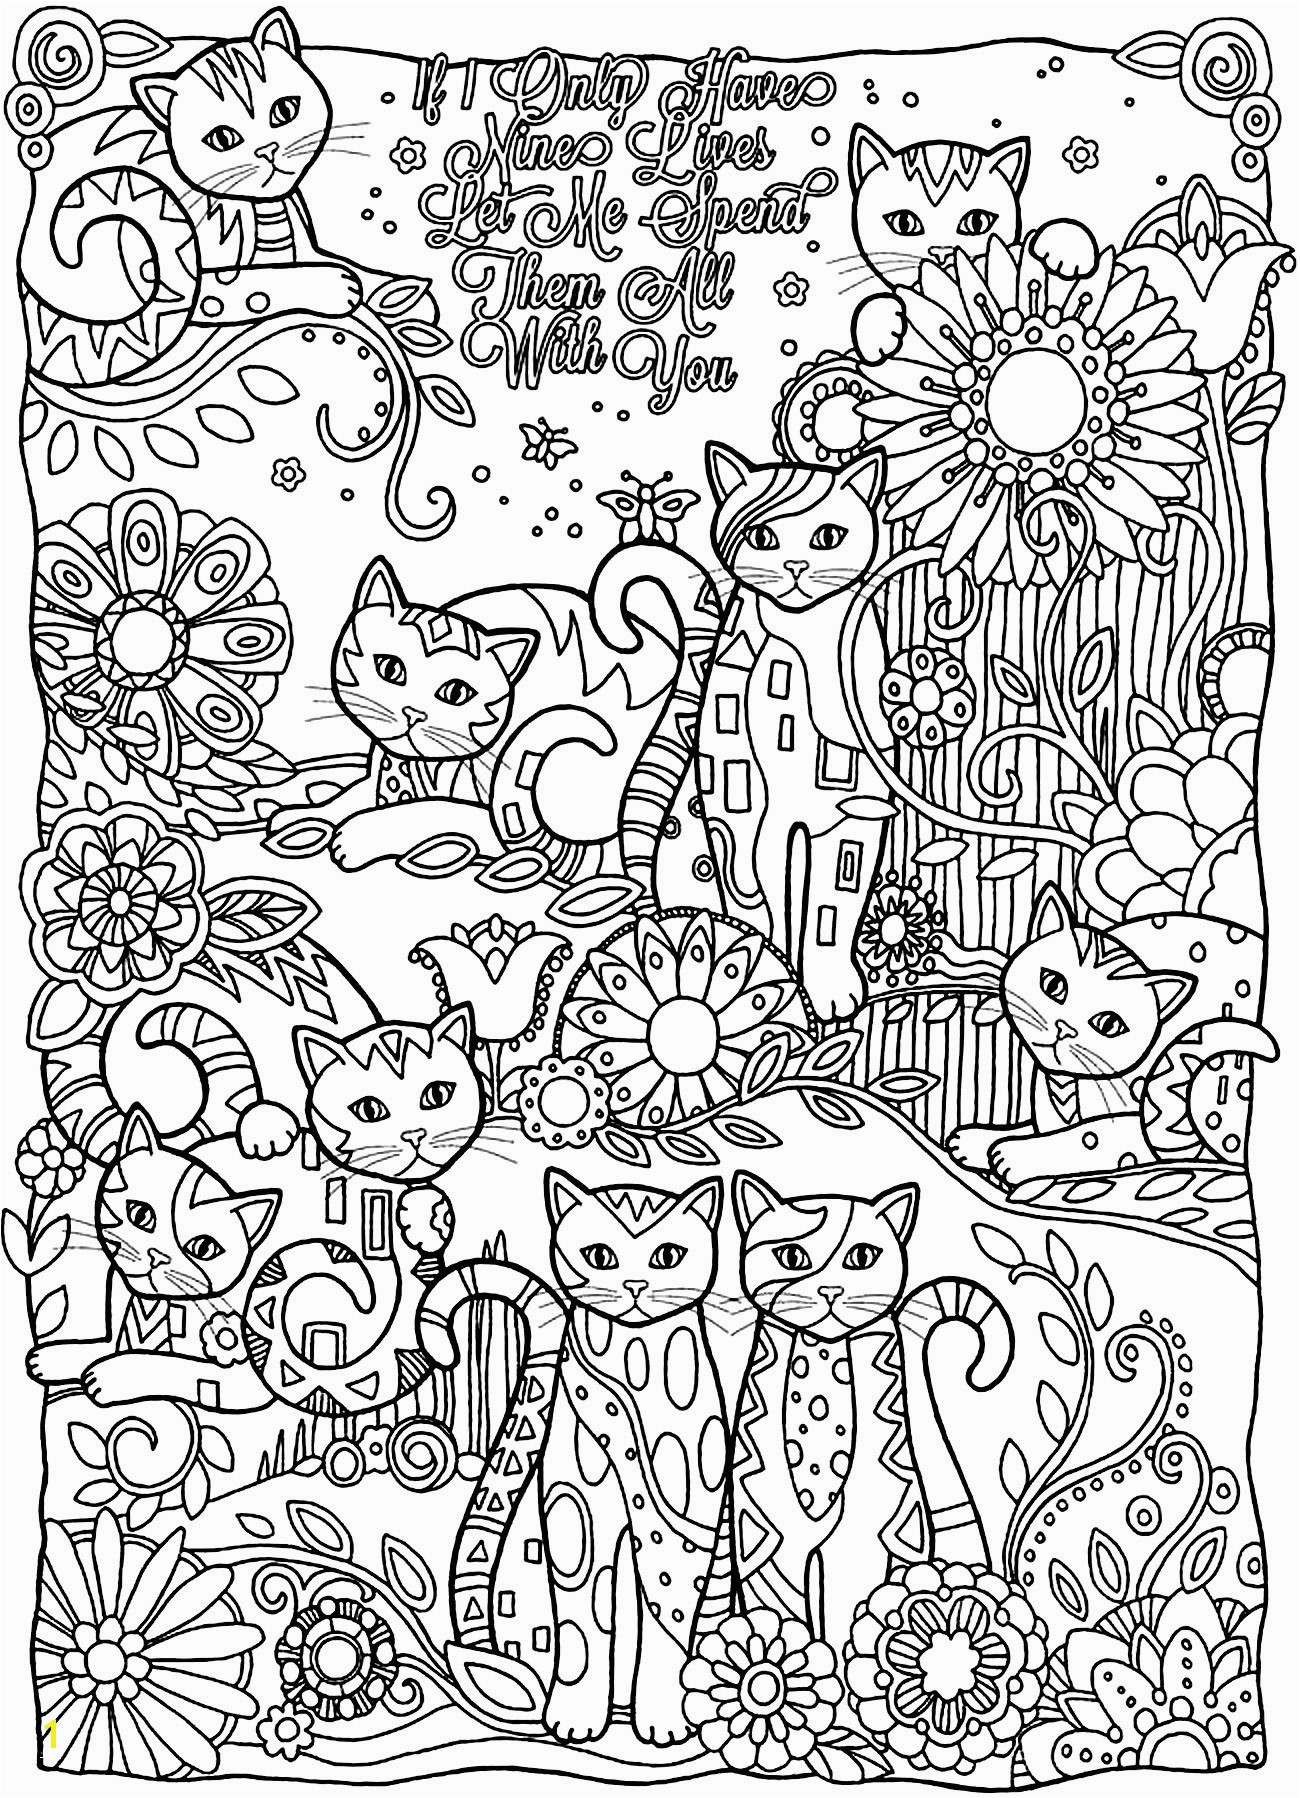 Free Mothers Day Coloring Pages In Great Demand Free Printable Mothers Day Coloring Pages